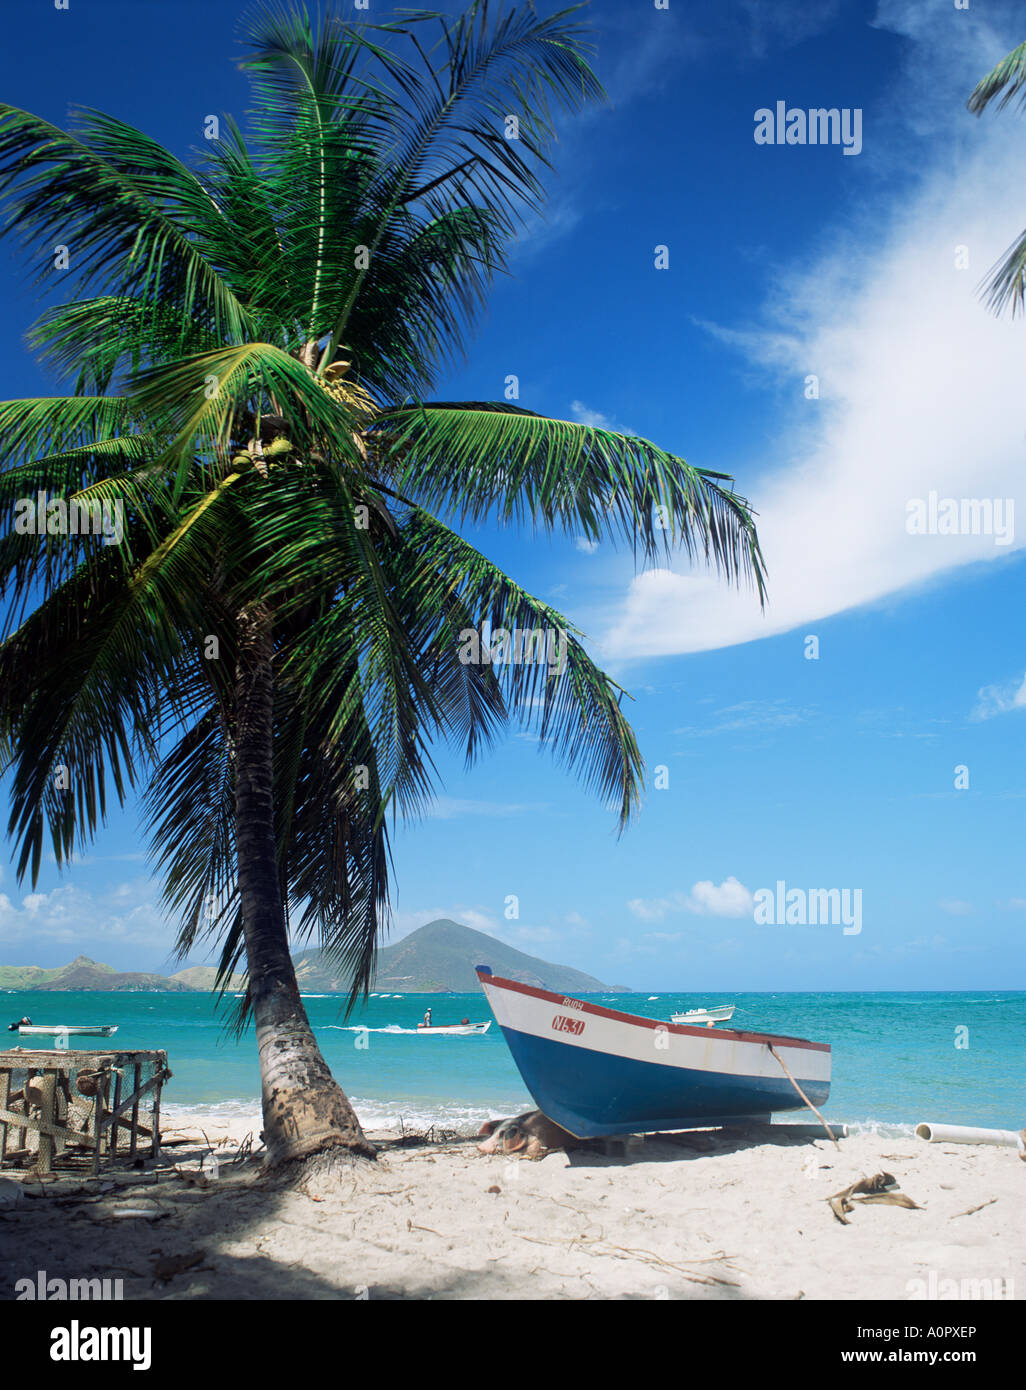 Vista verso St Kitts Nevis Isole Sottovento West Indies Caraibi America Centrale Foto Stock